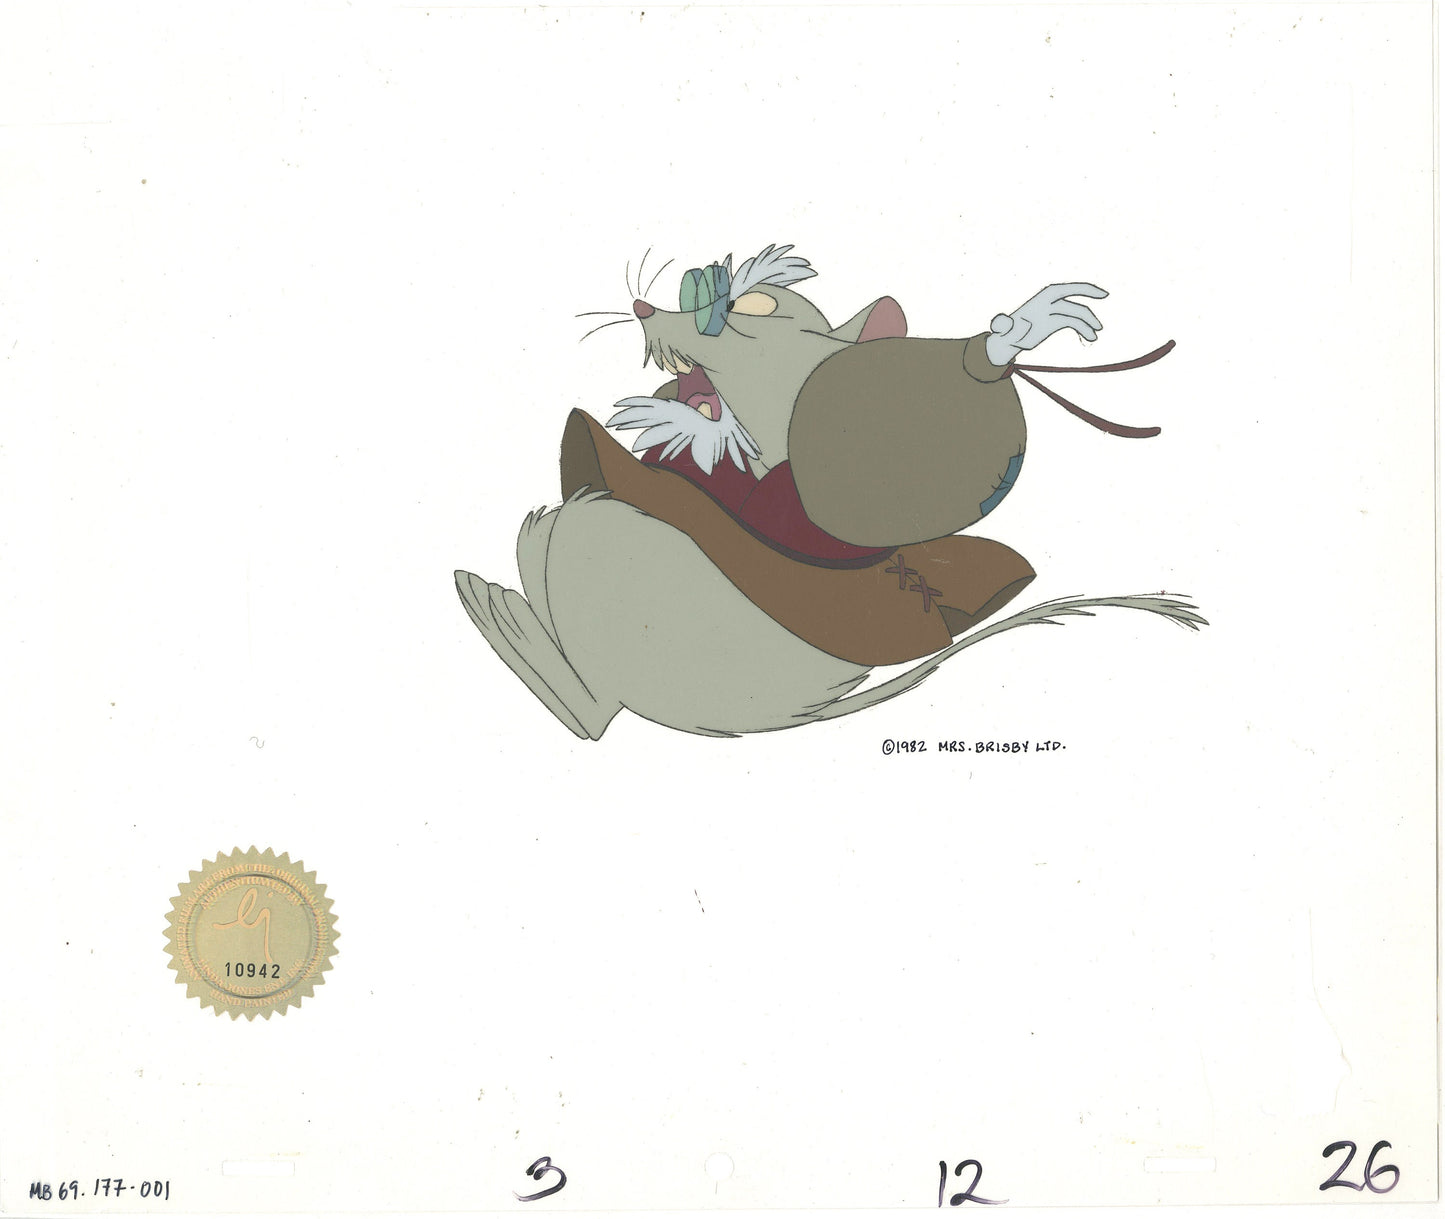 Don Bluth Secret of NIMH Mr Ages 1982 Original Production Animation Cel Used to make the cartoon 177-001